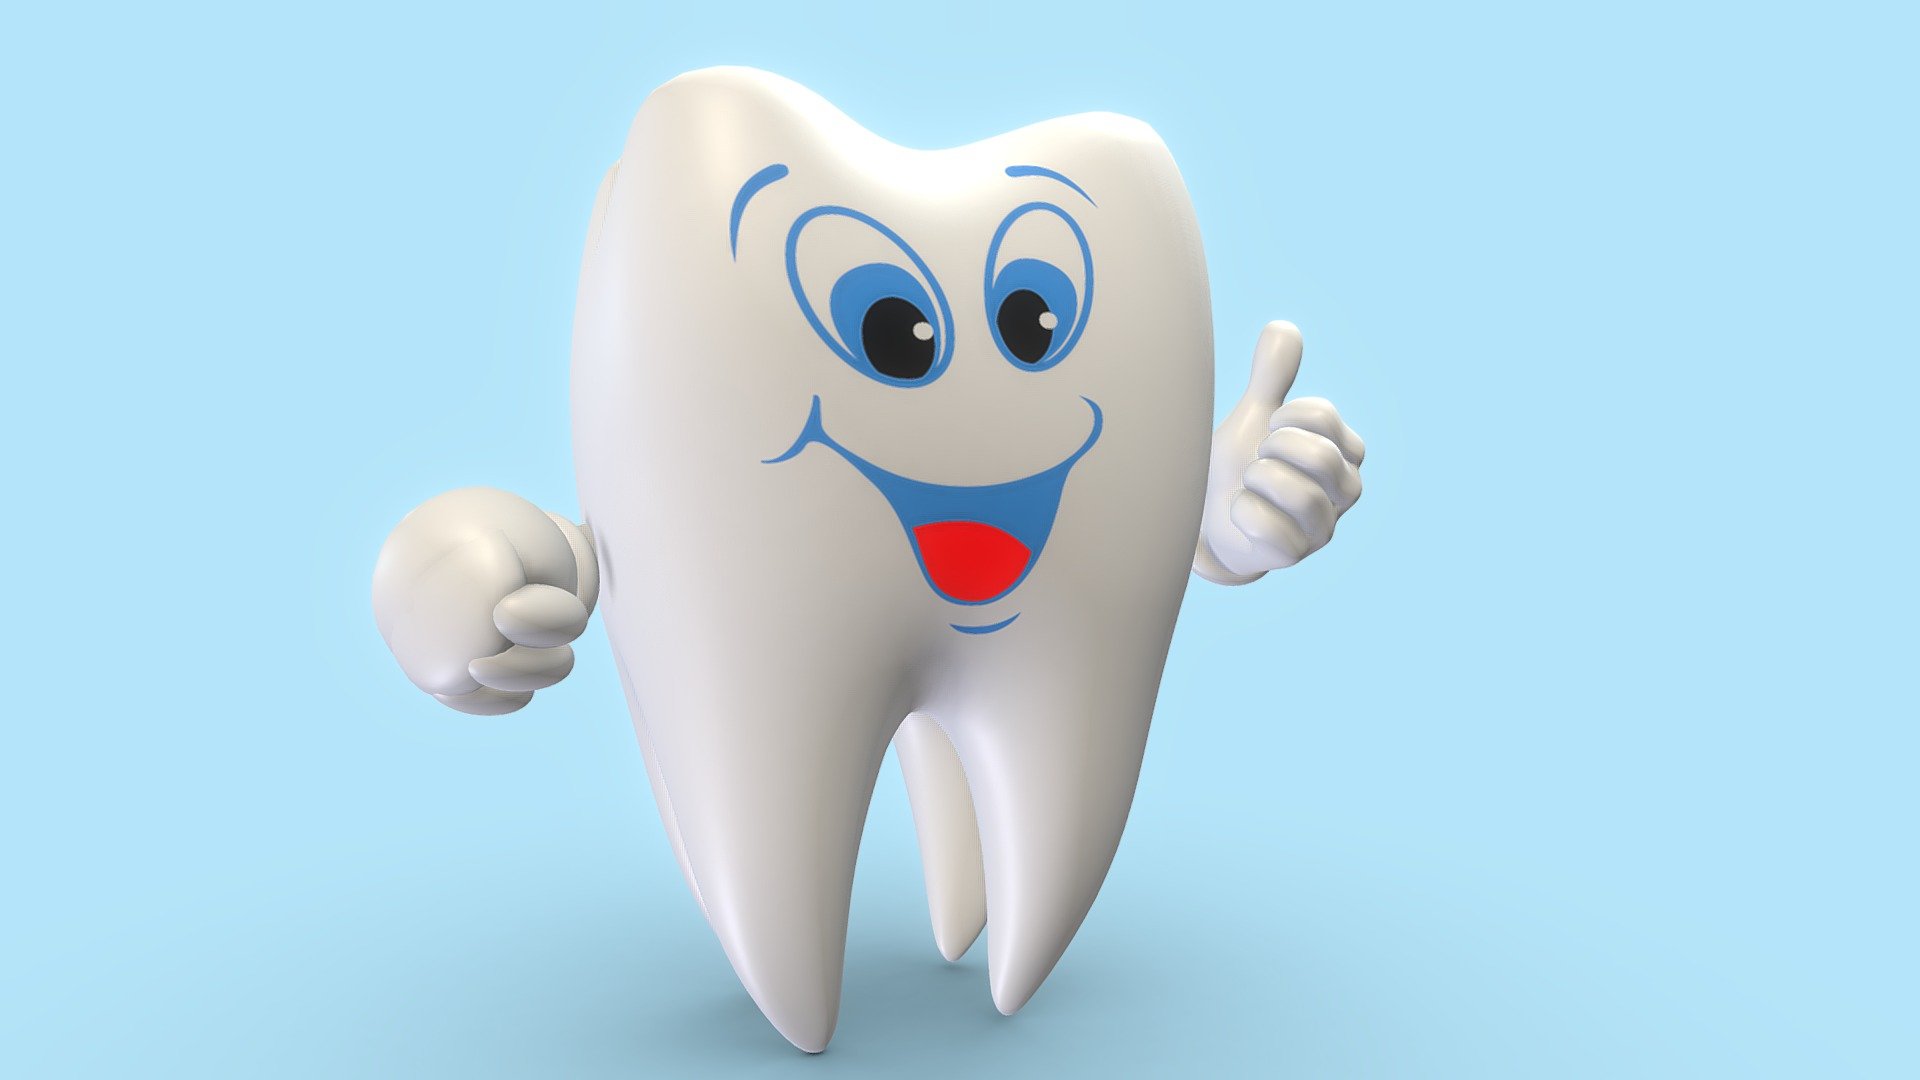 Dentist Smiling Tooth Character/Cartoon 3D Model
Character can be used for advertisements in 3D,AR &amp; Websites - Dentist Smiling Tooth Character/Cartoon 3D Model - Buy Royalty Free 3D model by John Doe (@Johndoe3D) 3d model